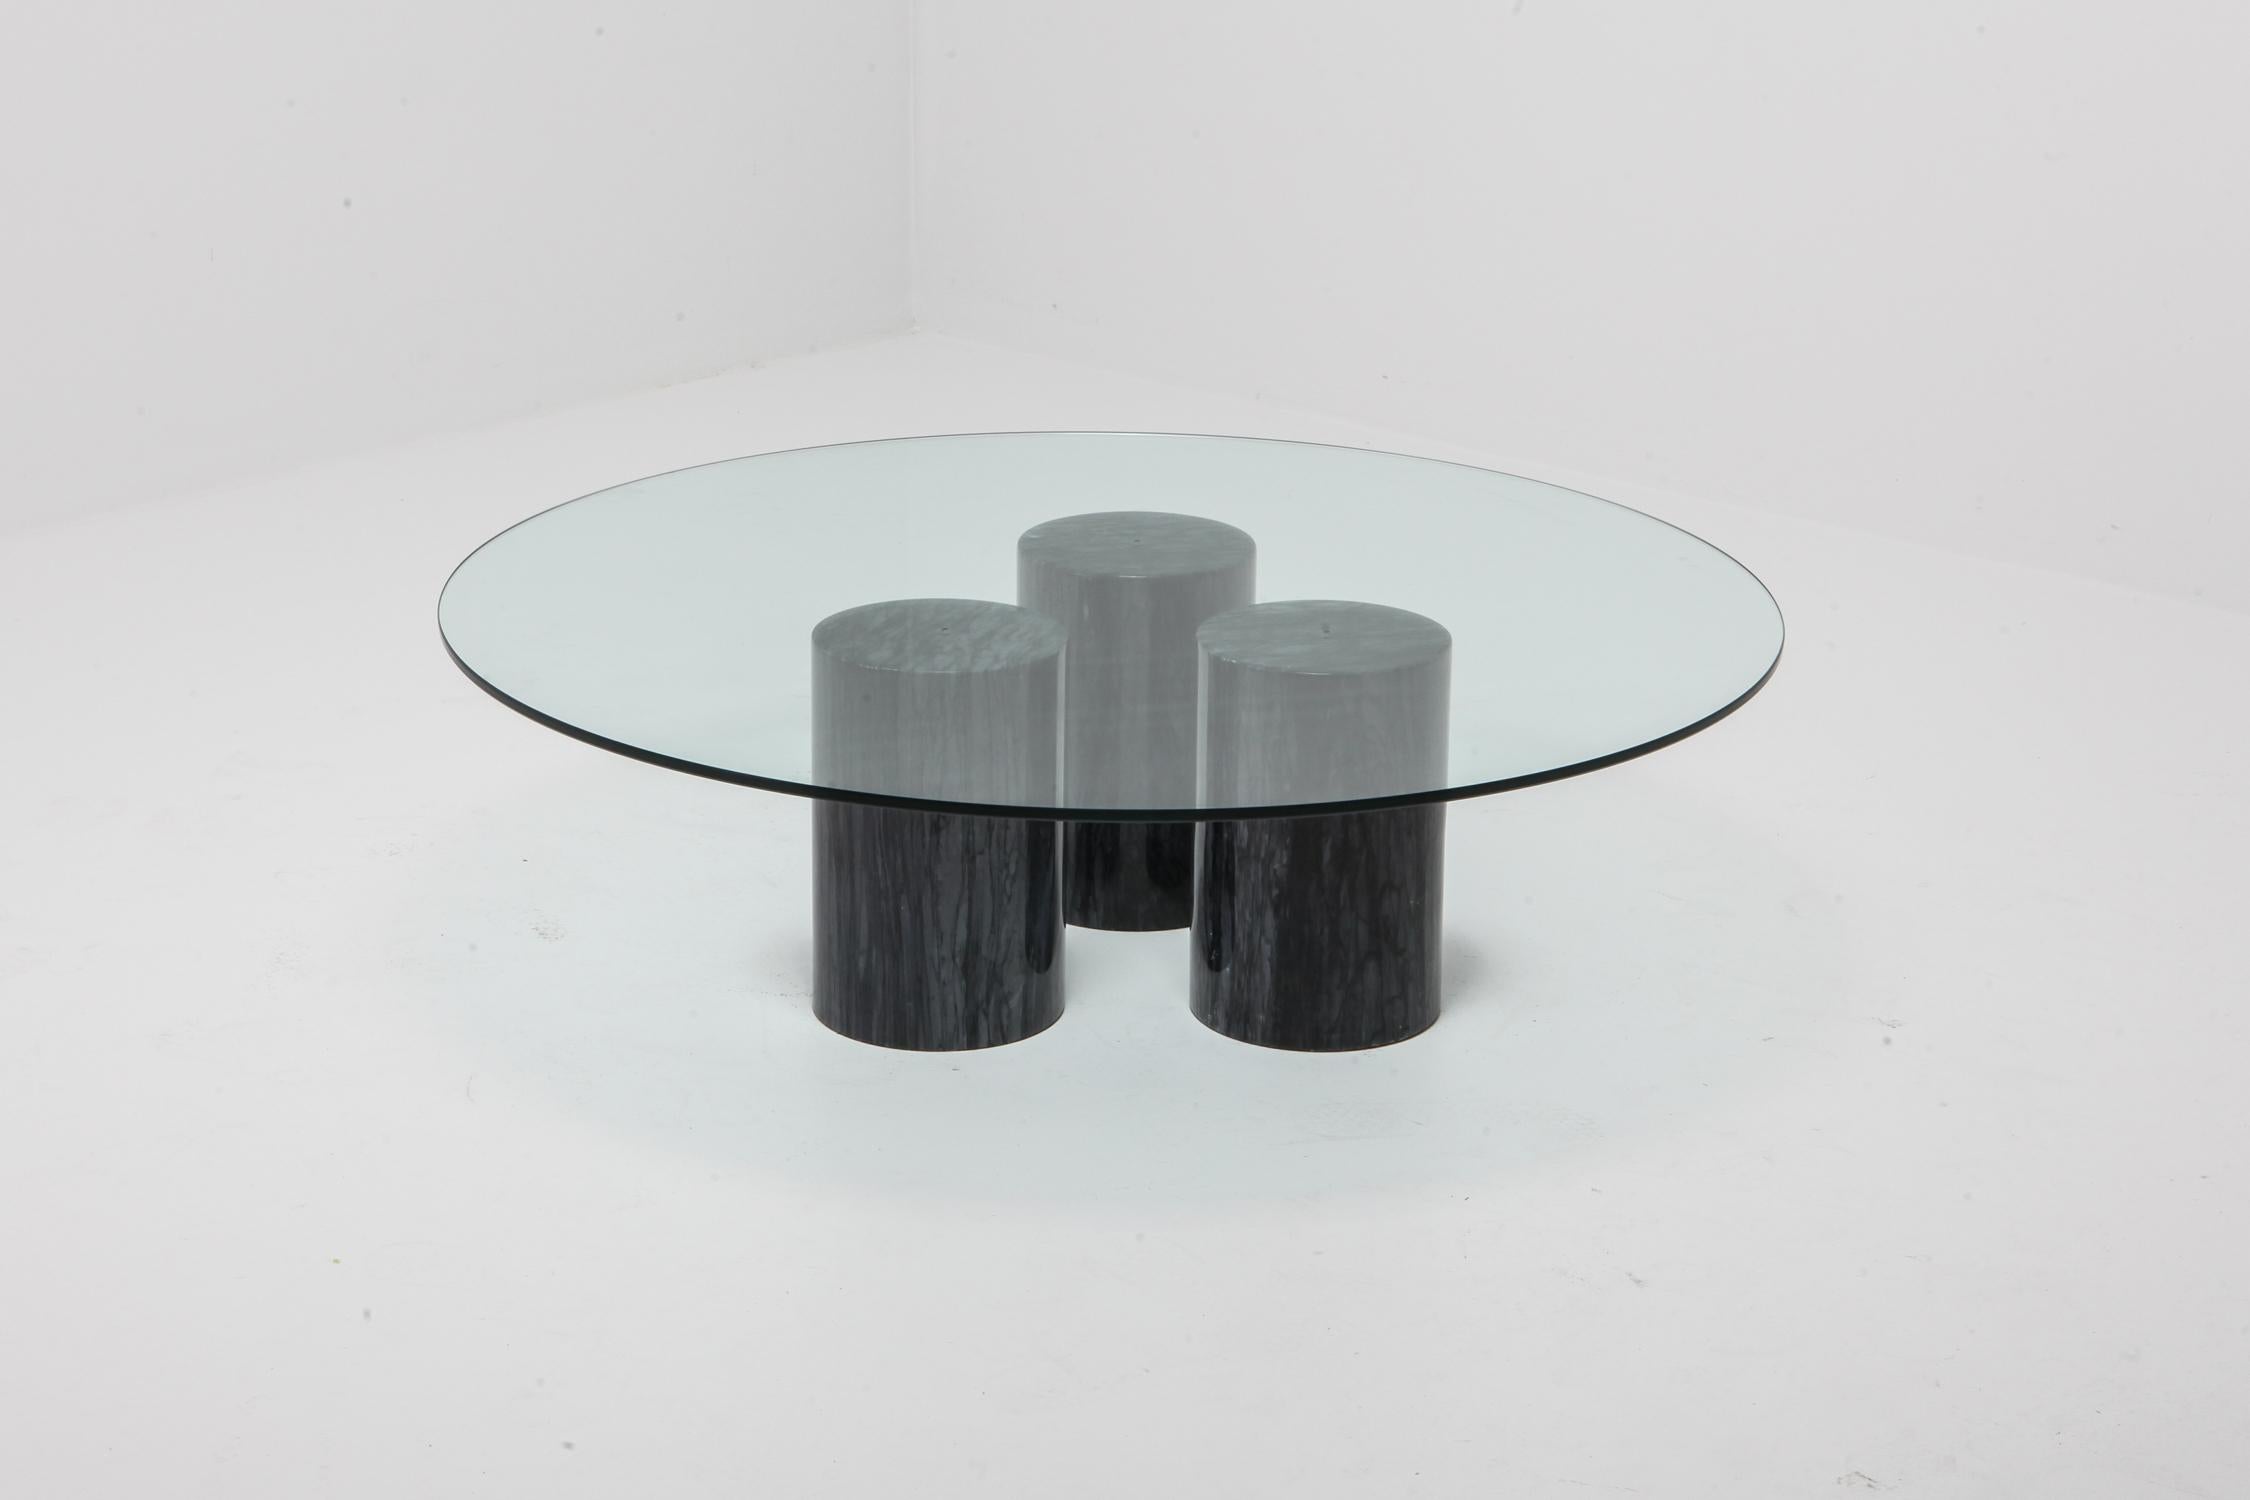 Post-modern cocktail table by Mario Bellini
Three black marble columns support a round glass top.
As the marble columns can be positioned in various ways, we could provide a custom made tabletop.
reach out with any questions.